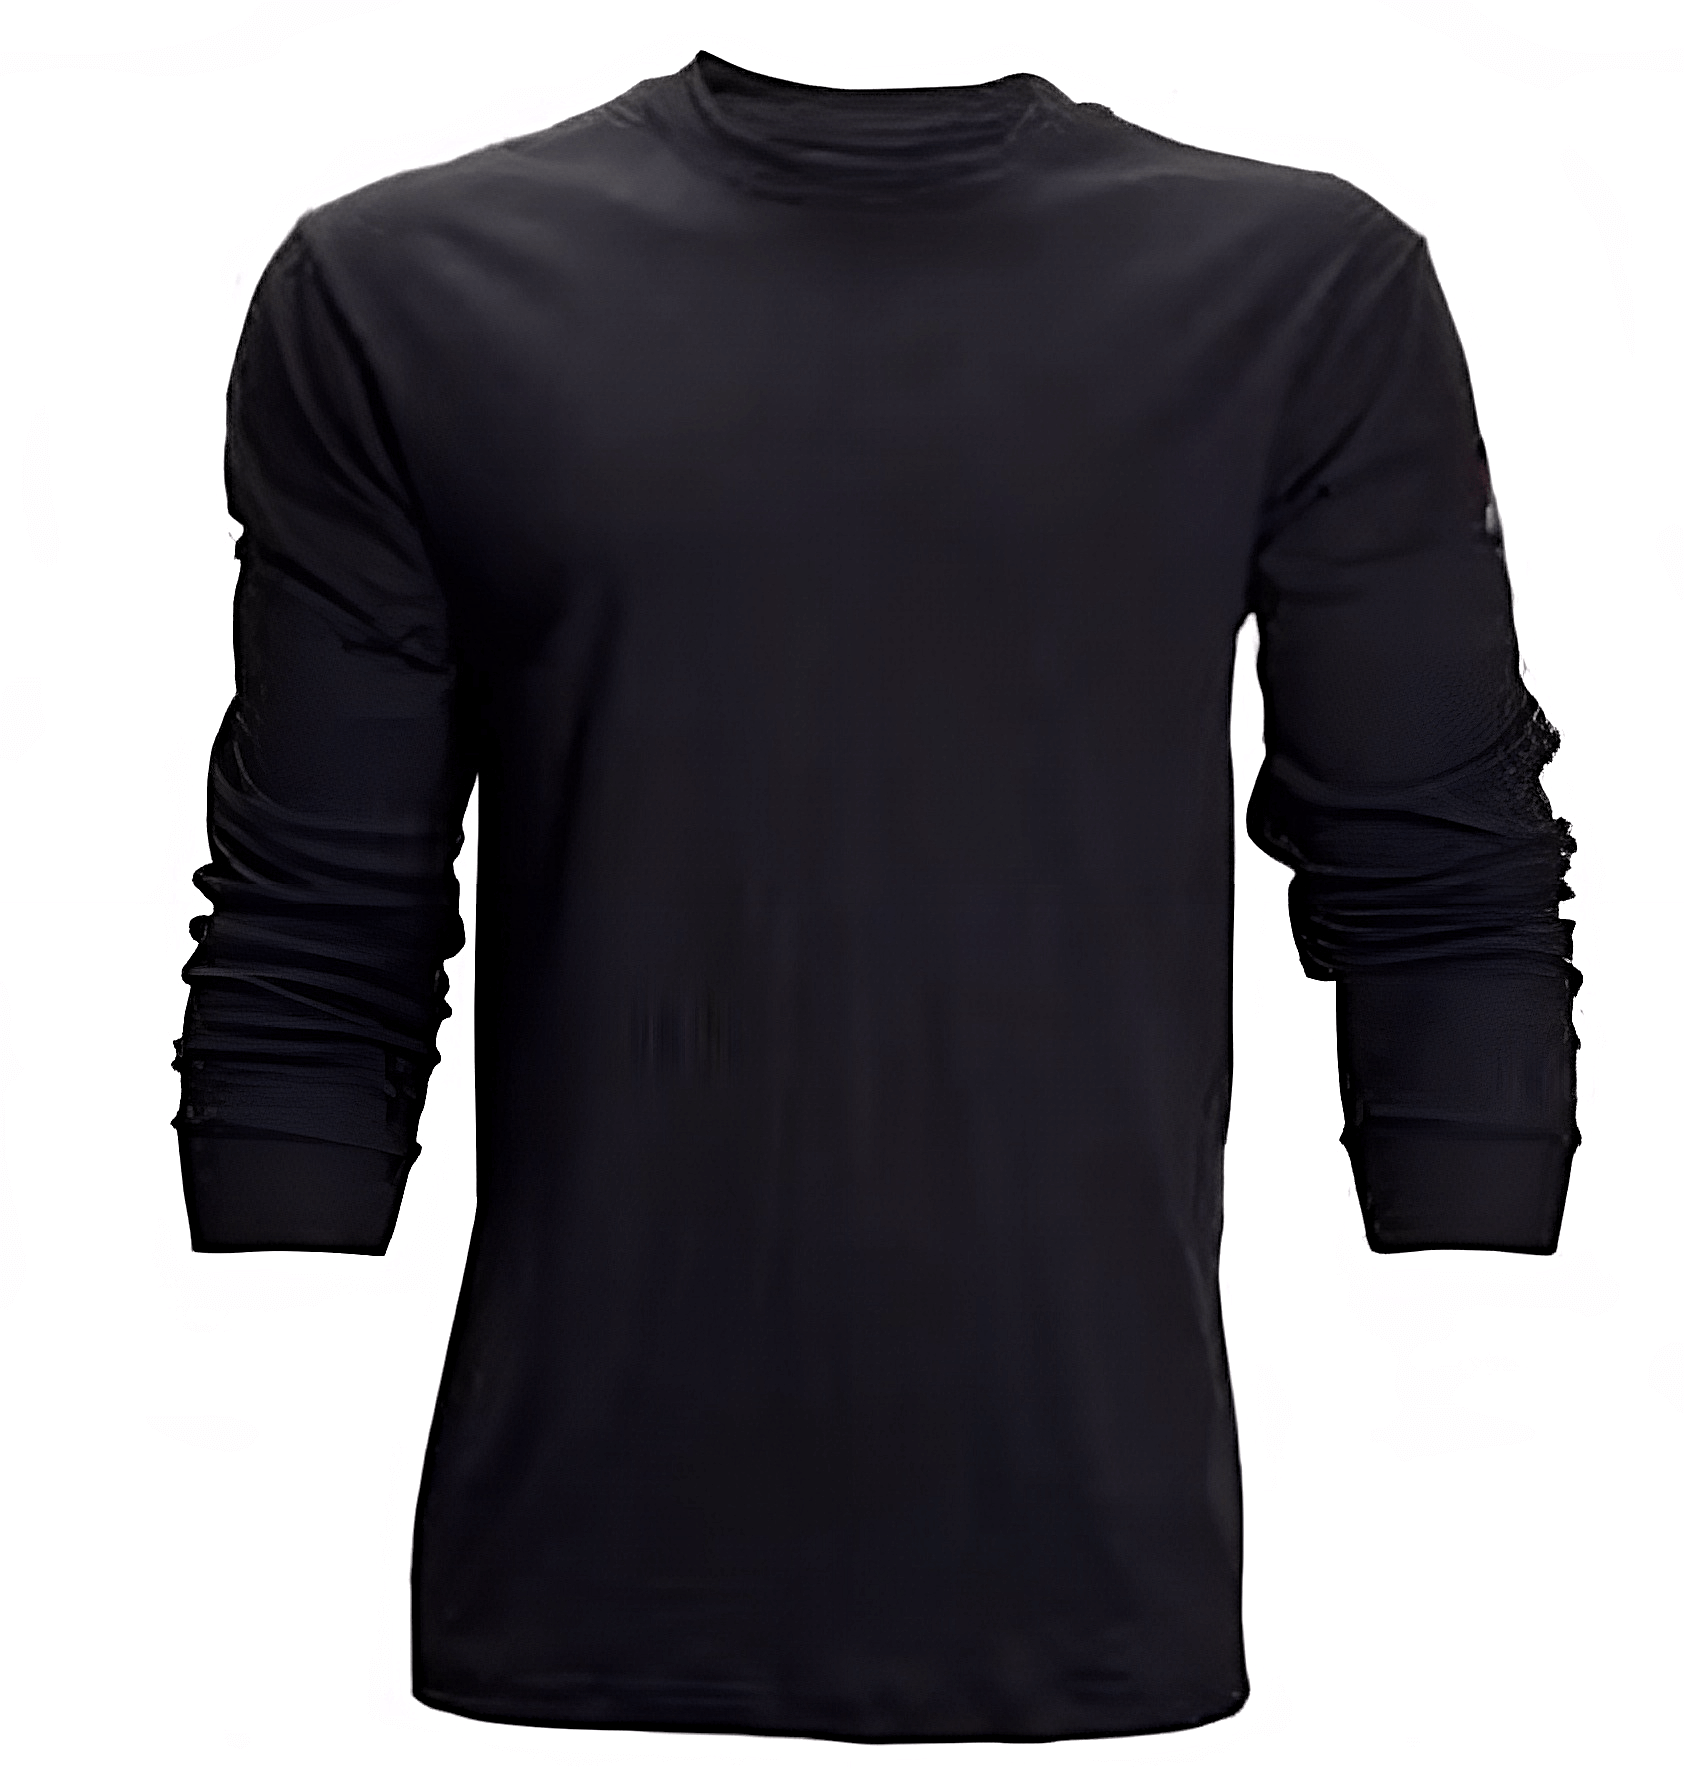 Flame Resistant Long Sleeve T-Shirt Flameproof